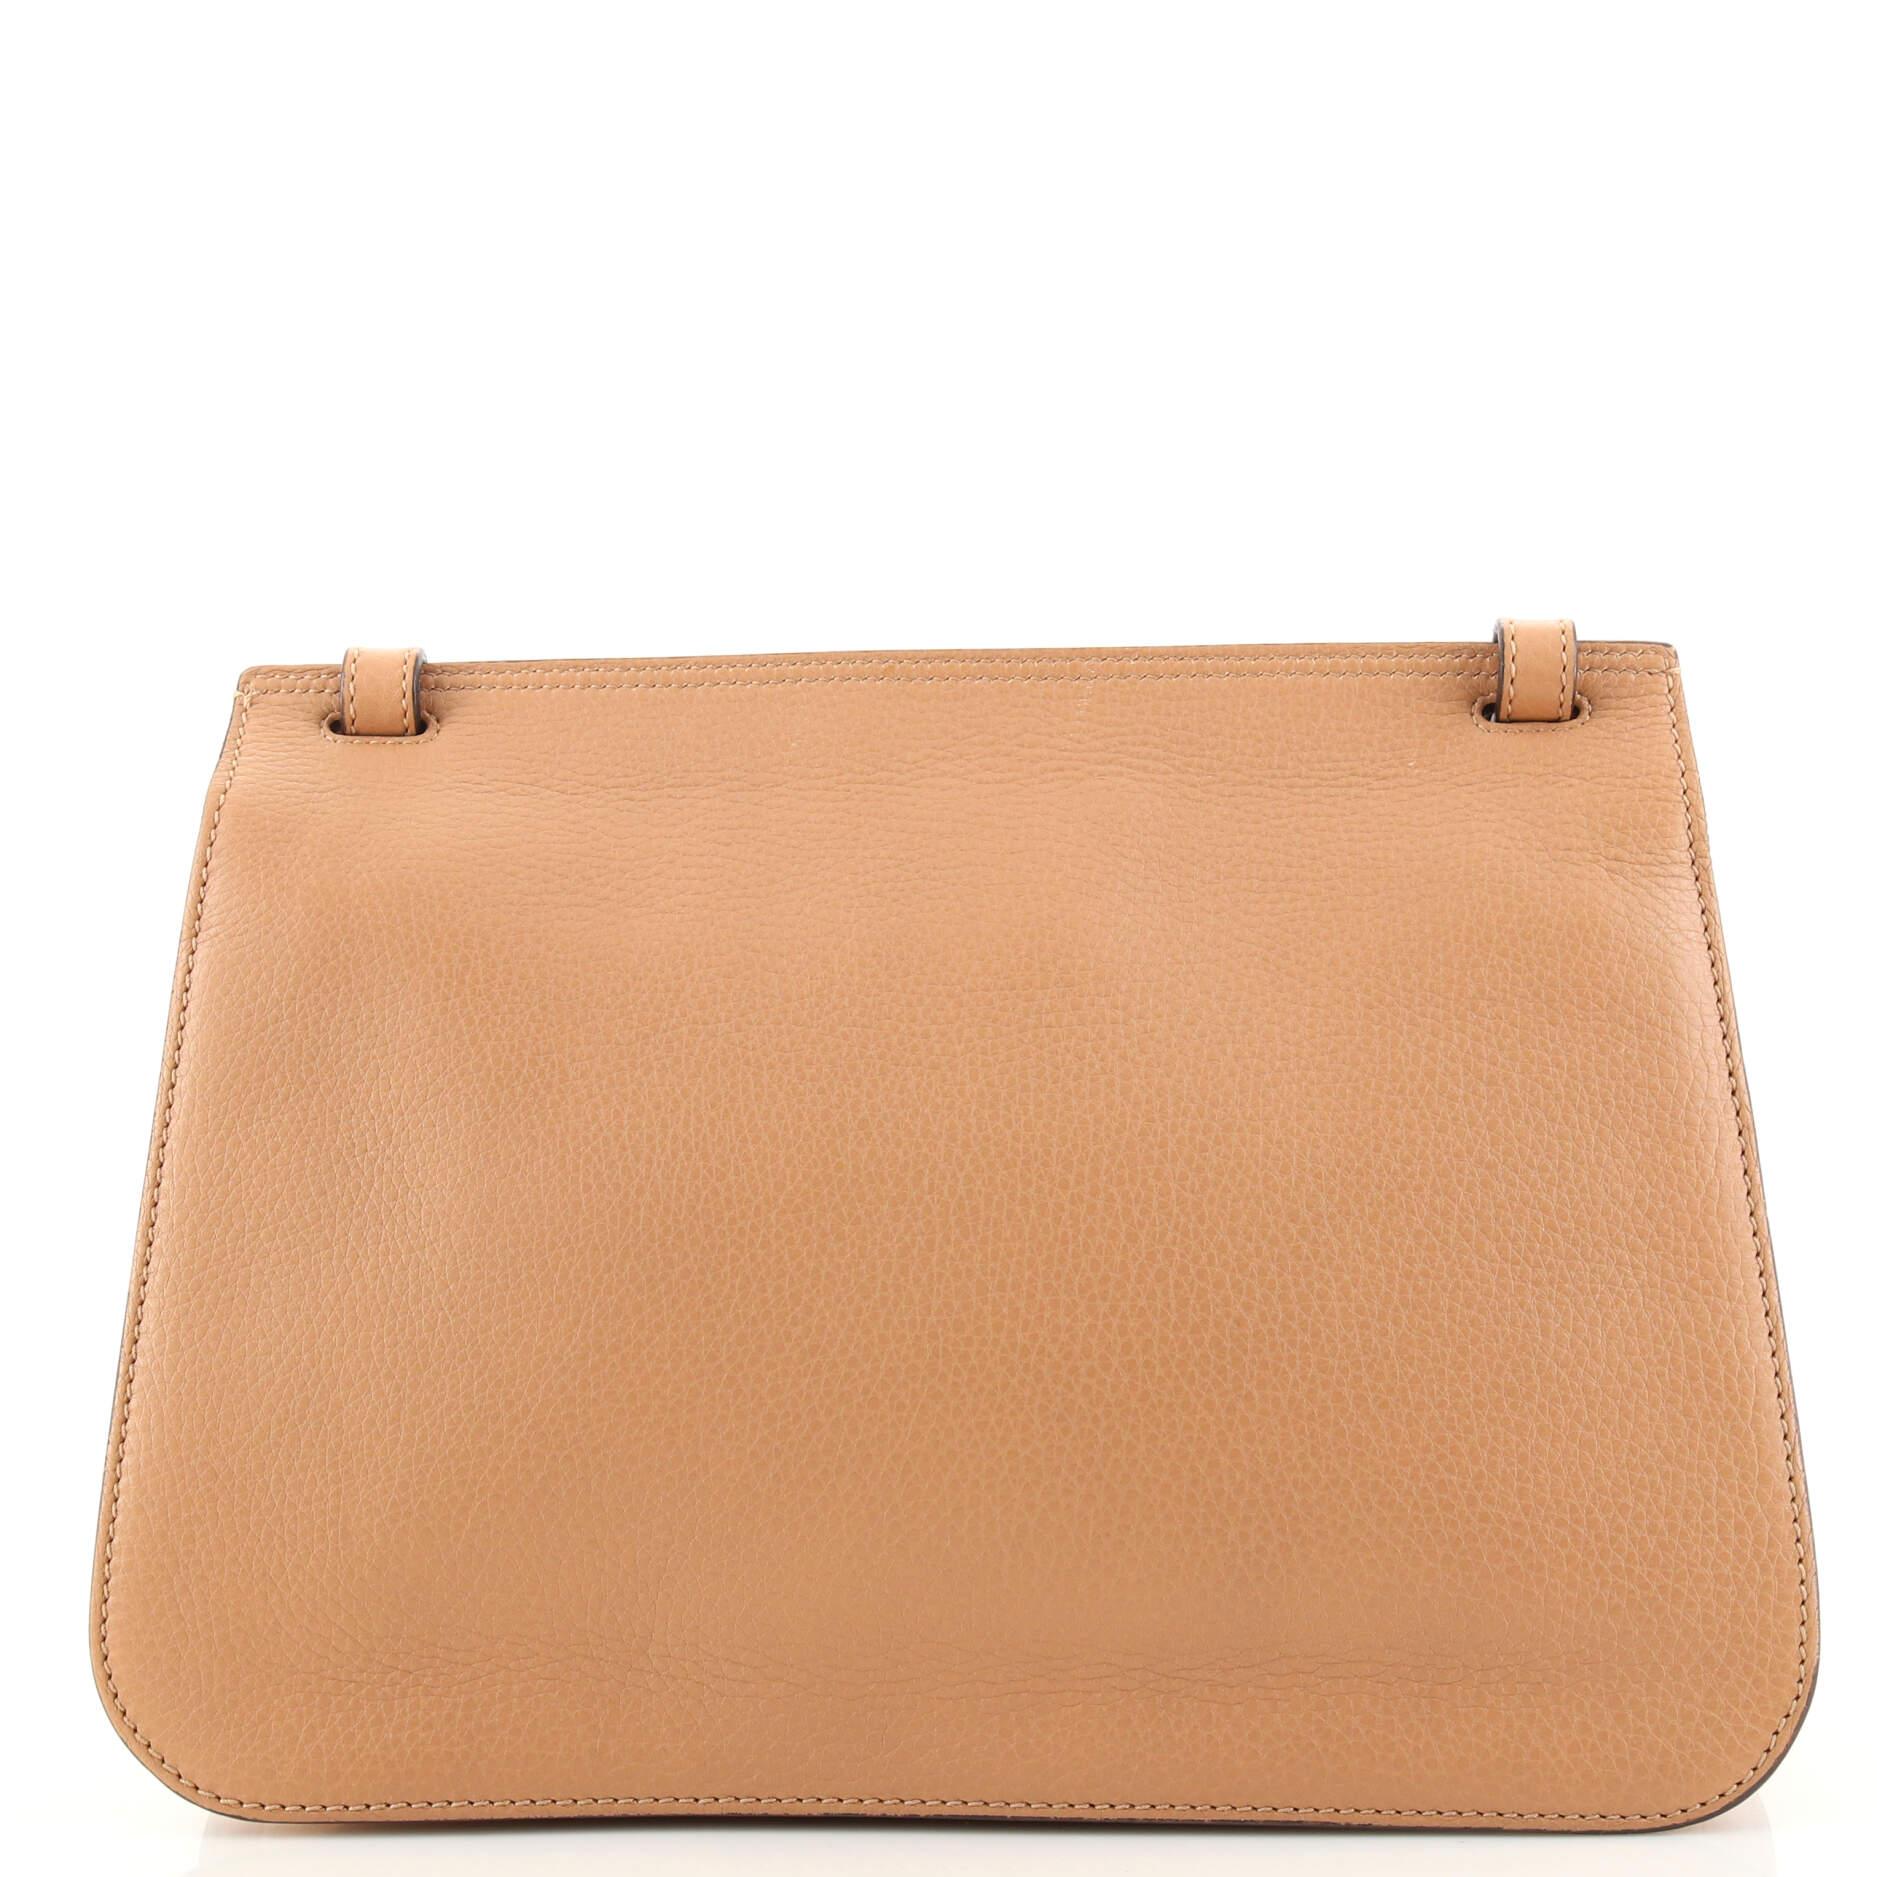 Beige Gucci Bamboo Daily Flap Bag Leather